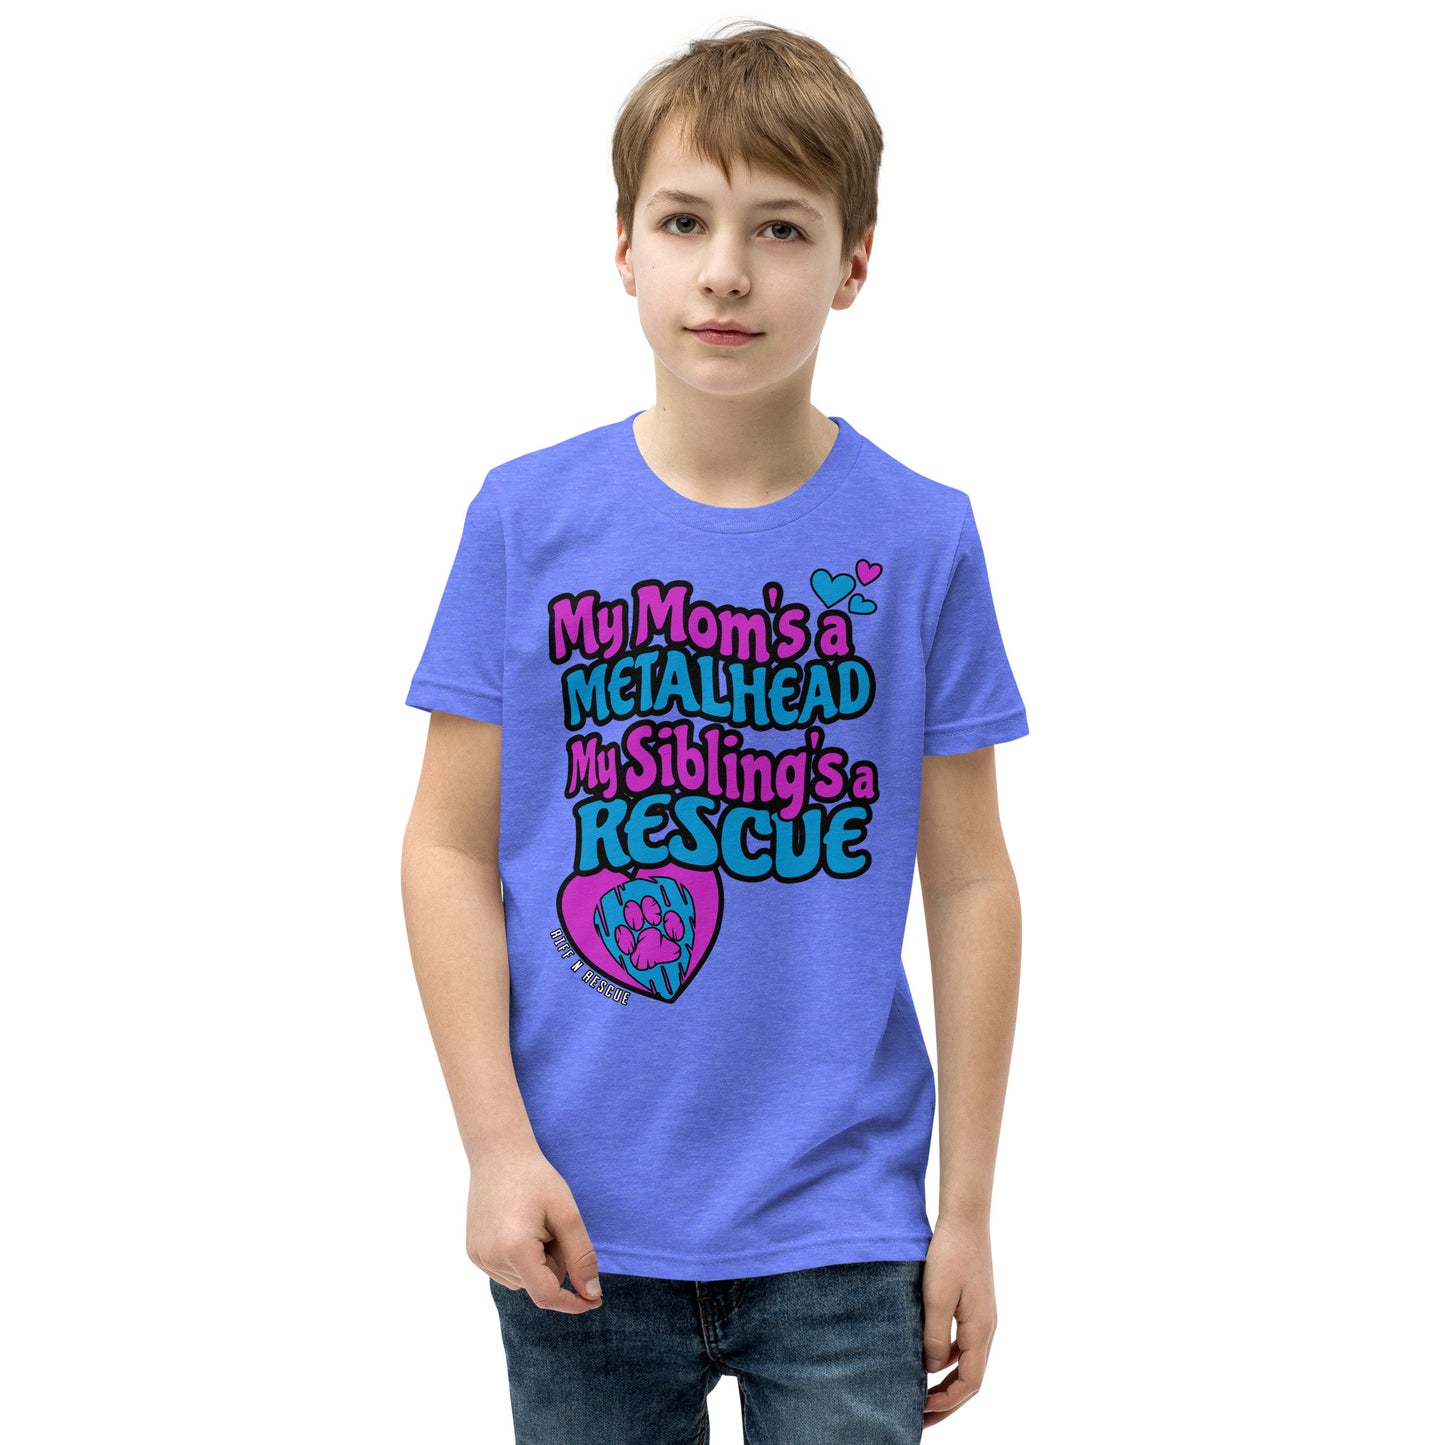 Rescue Sibling Youth Short Sleeve T-Shirt